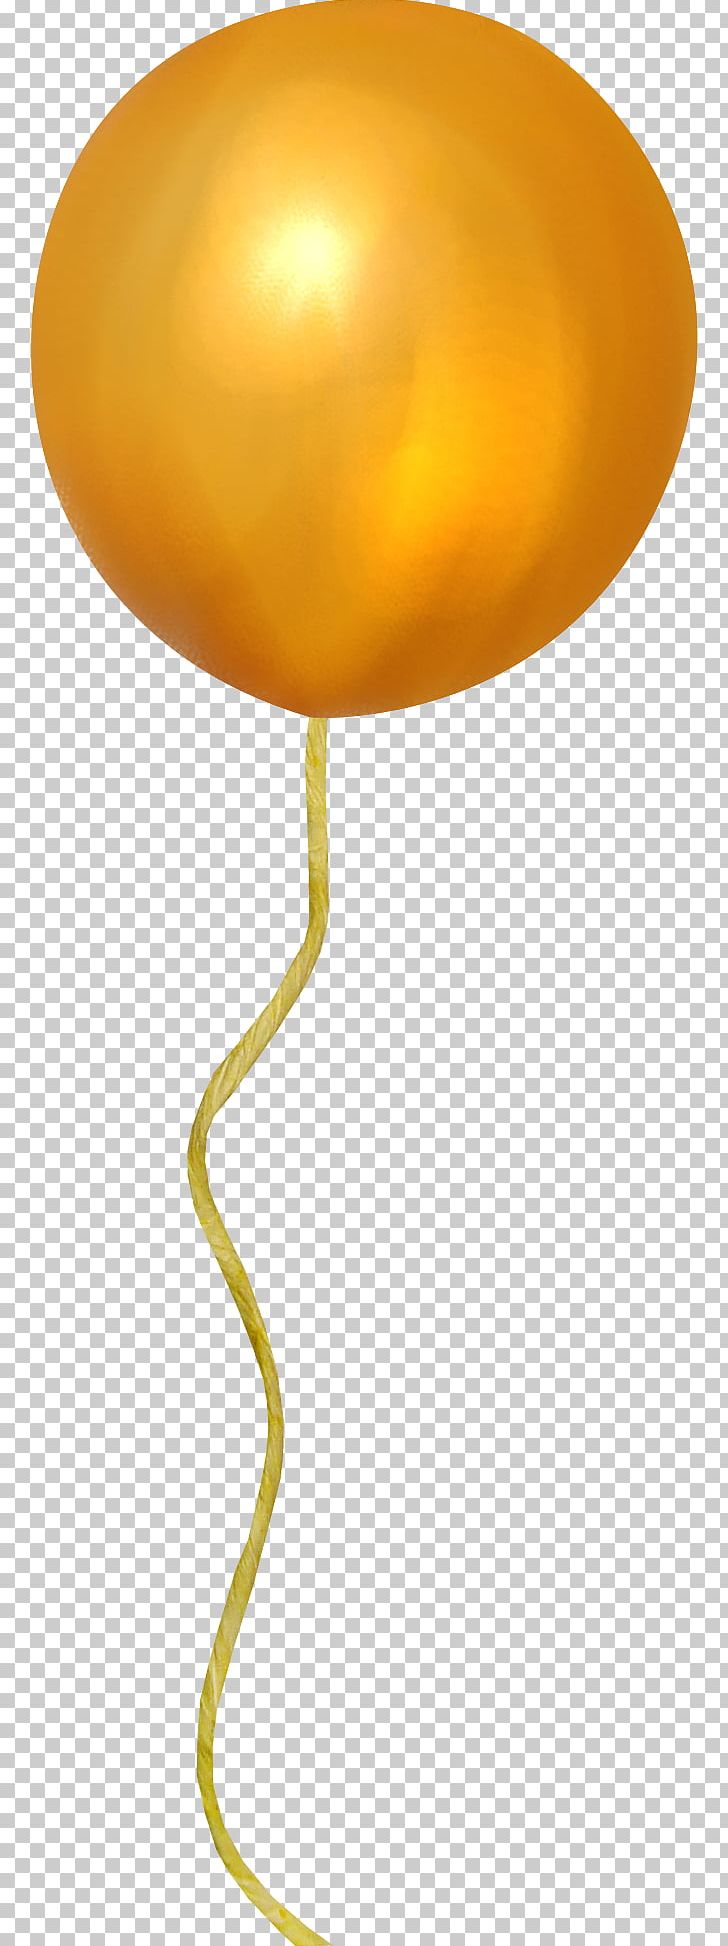 Balloon Orange PNG, Clipart, Balloon, Baloon, Birthday, Blue, Ceiling Fixture Free PNG Download